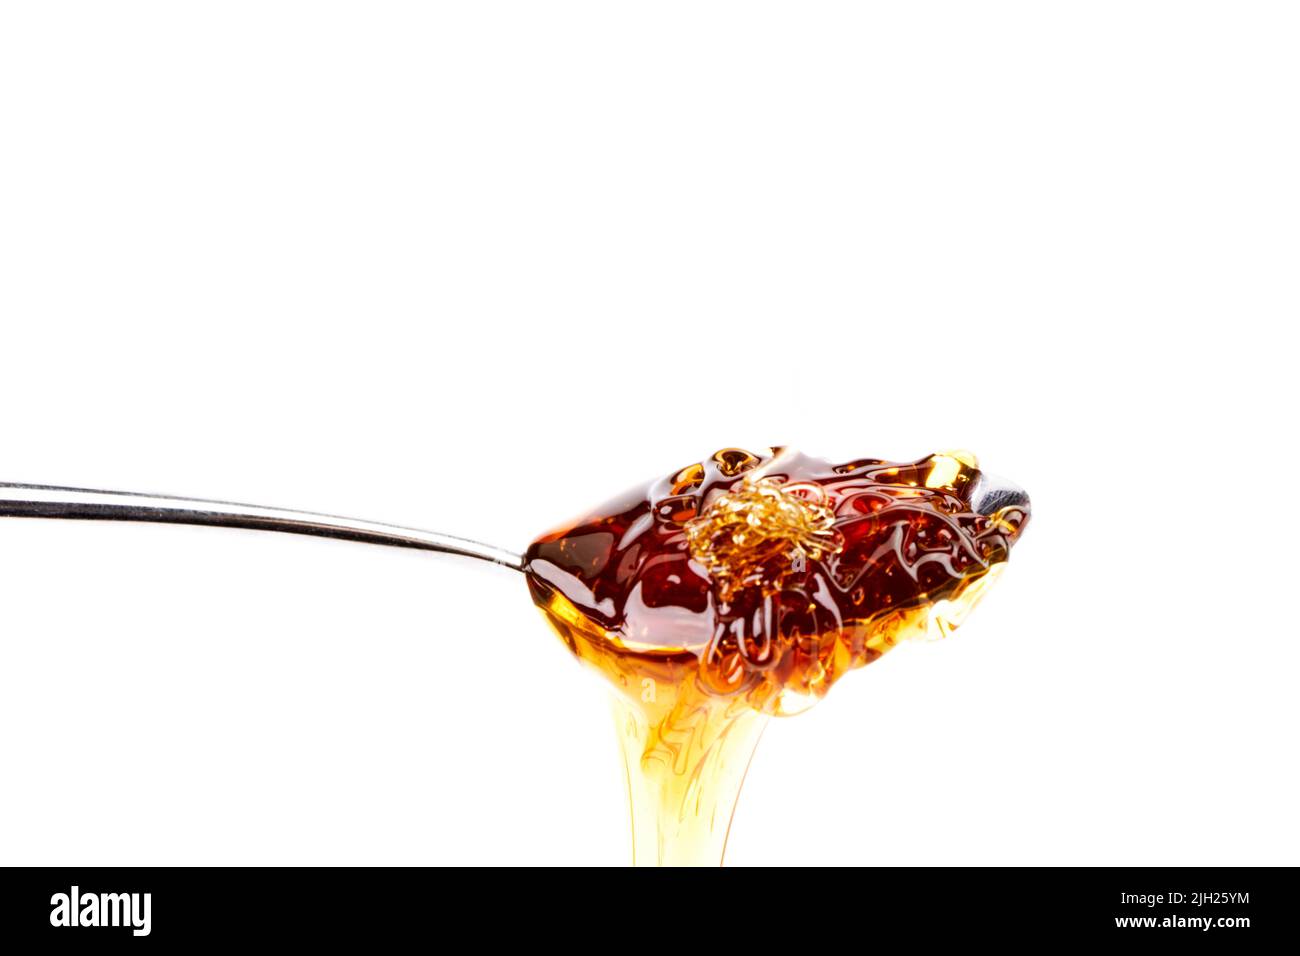 Tasty honey dripping from a teaspoon. Healthy and organic food Stock Photo